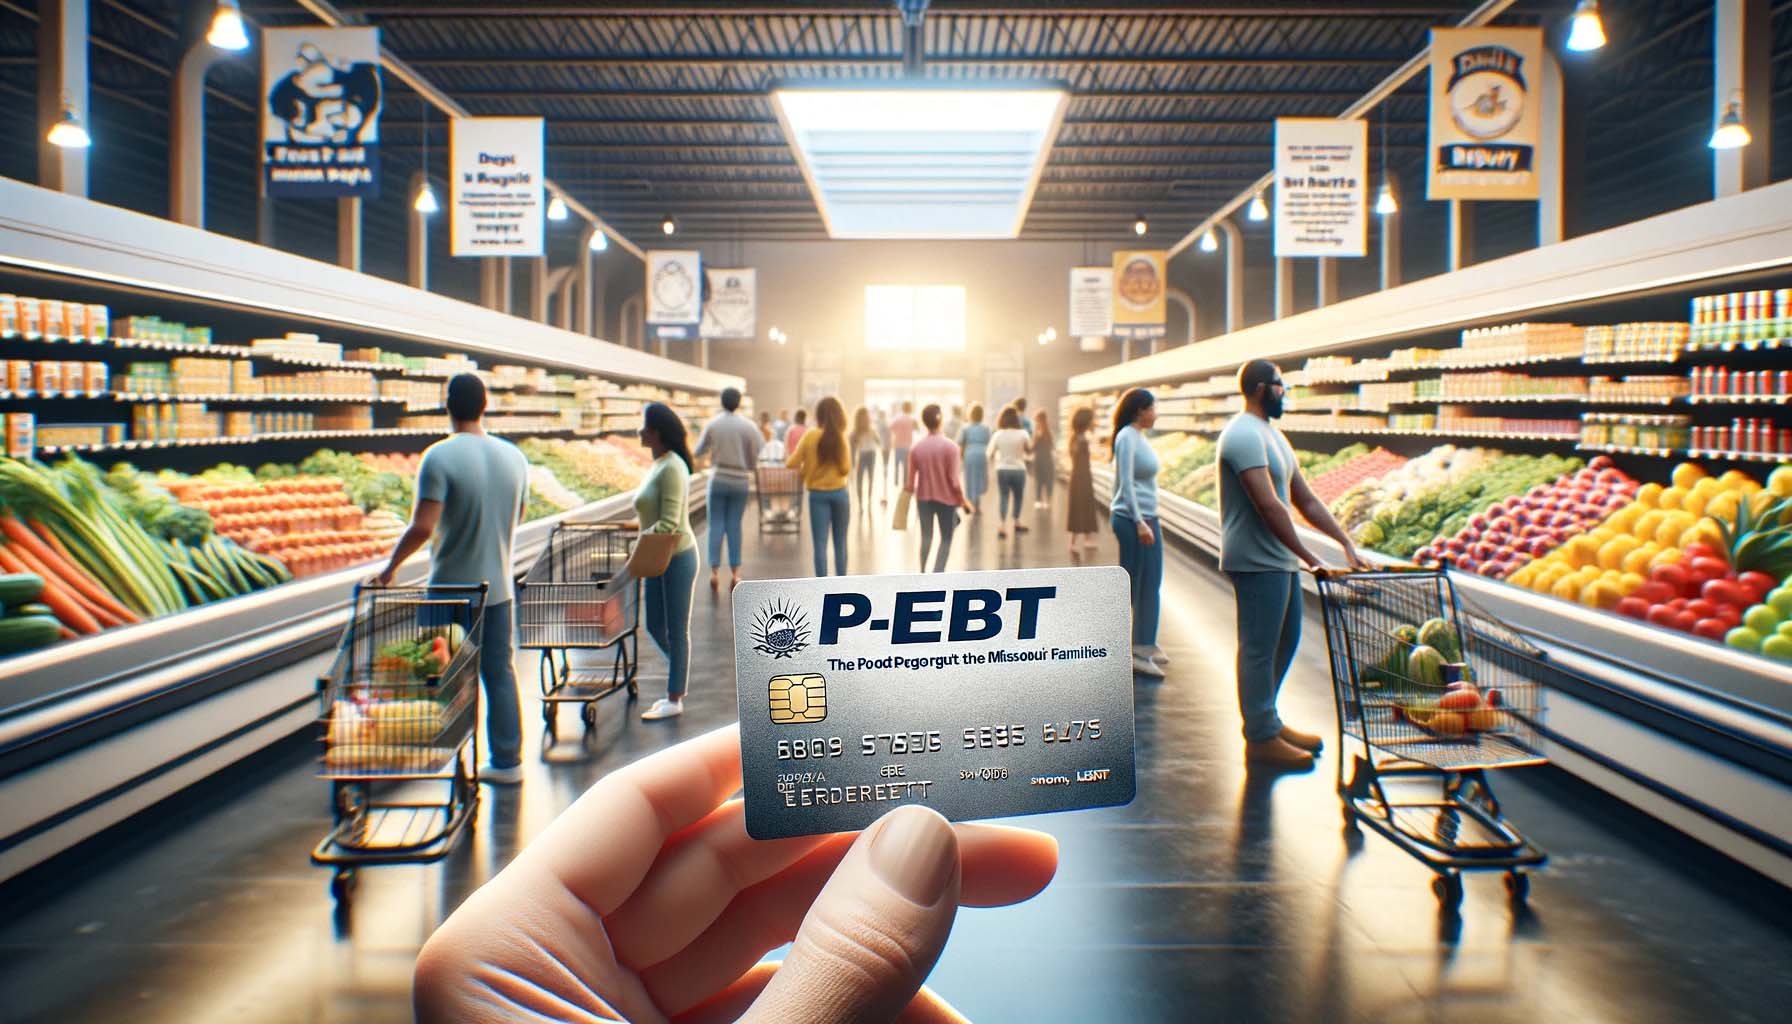 Grocery Store scene with P-EBT card as central element news graphic